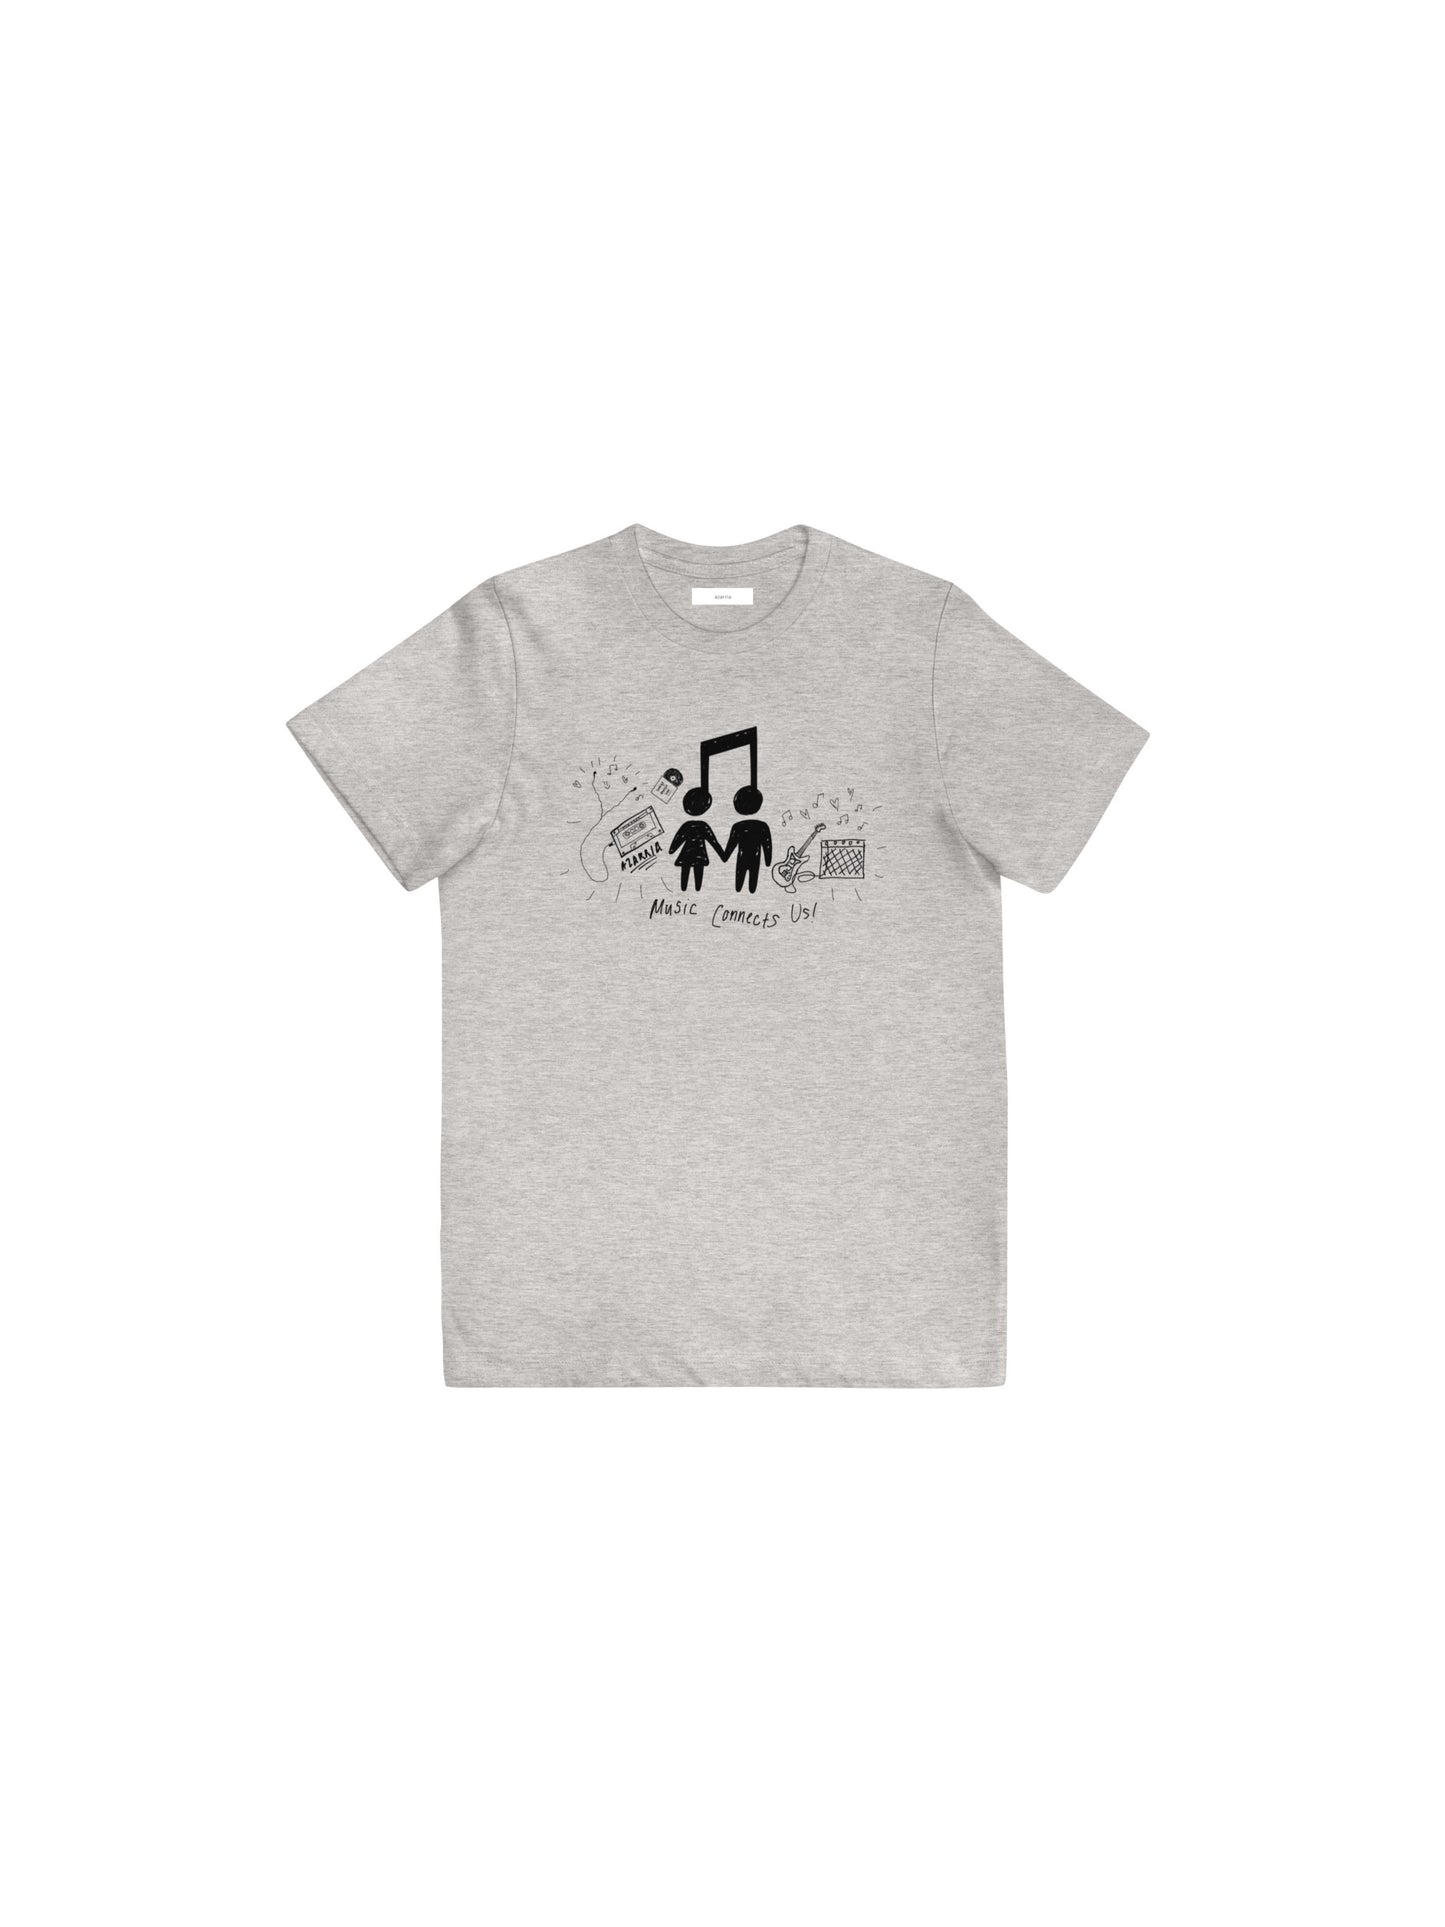 Music Connects People Baby Tee